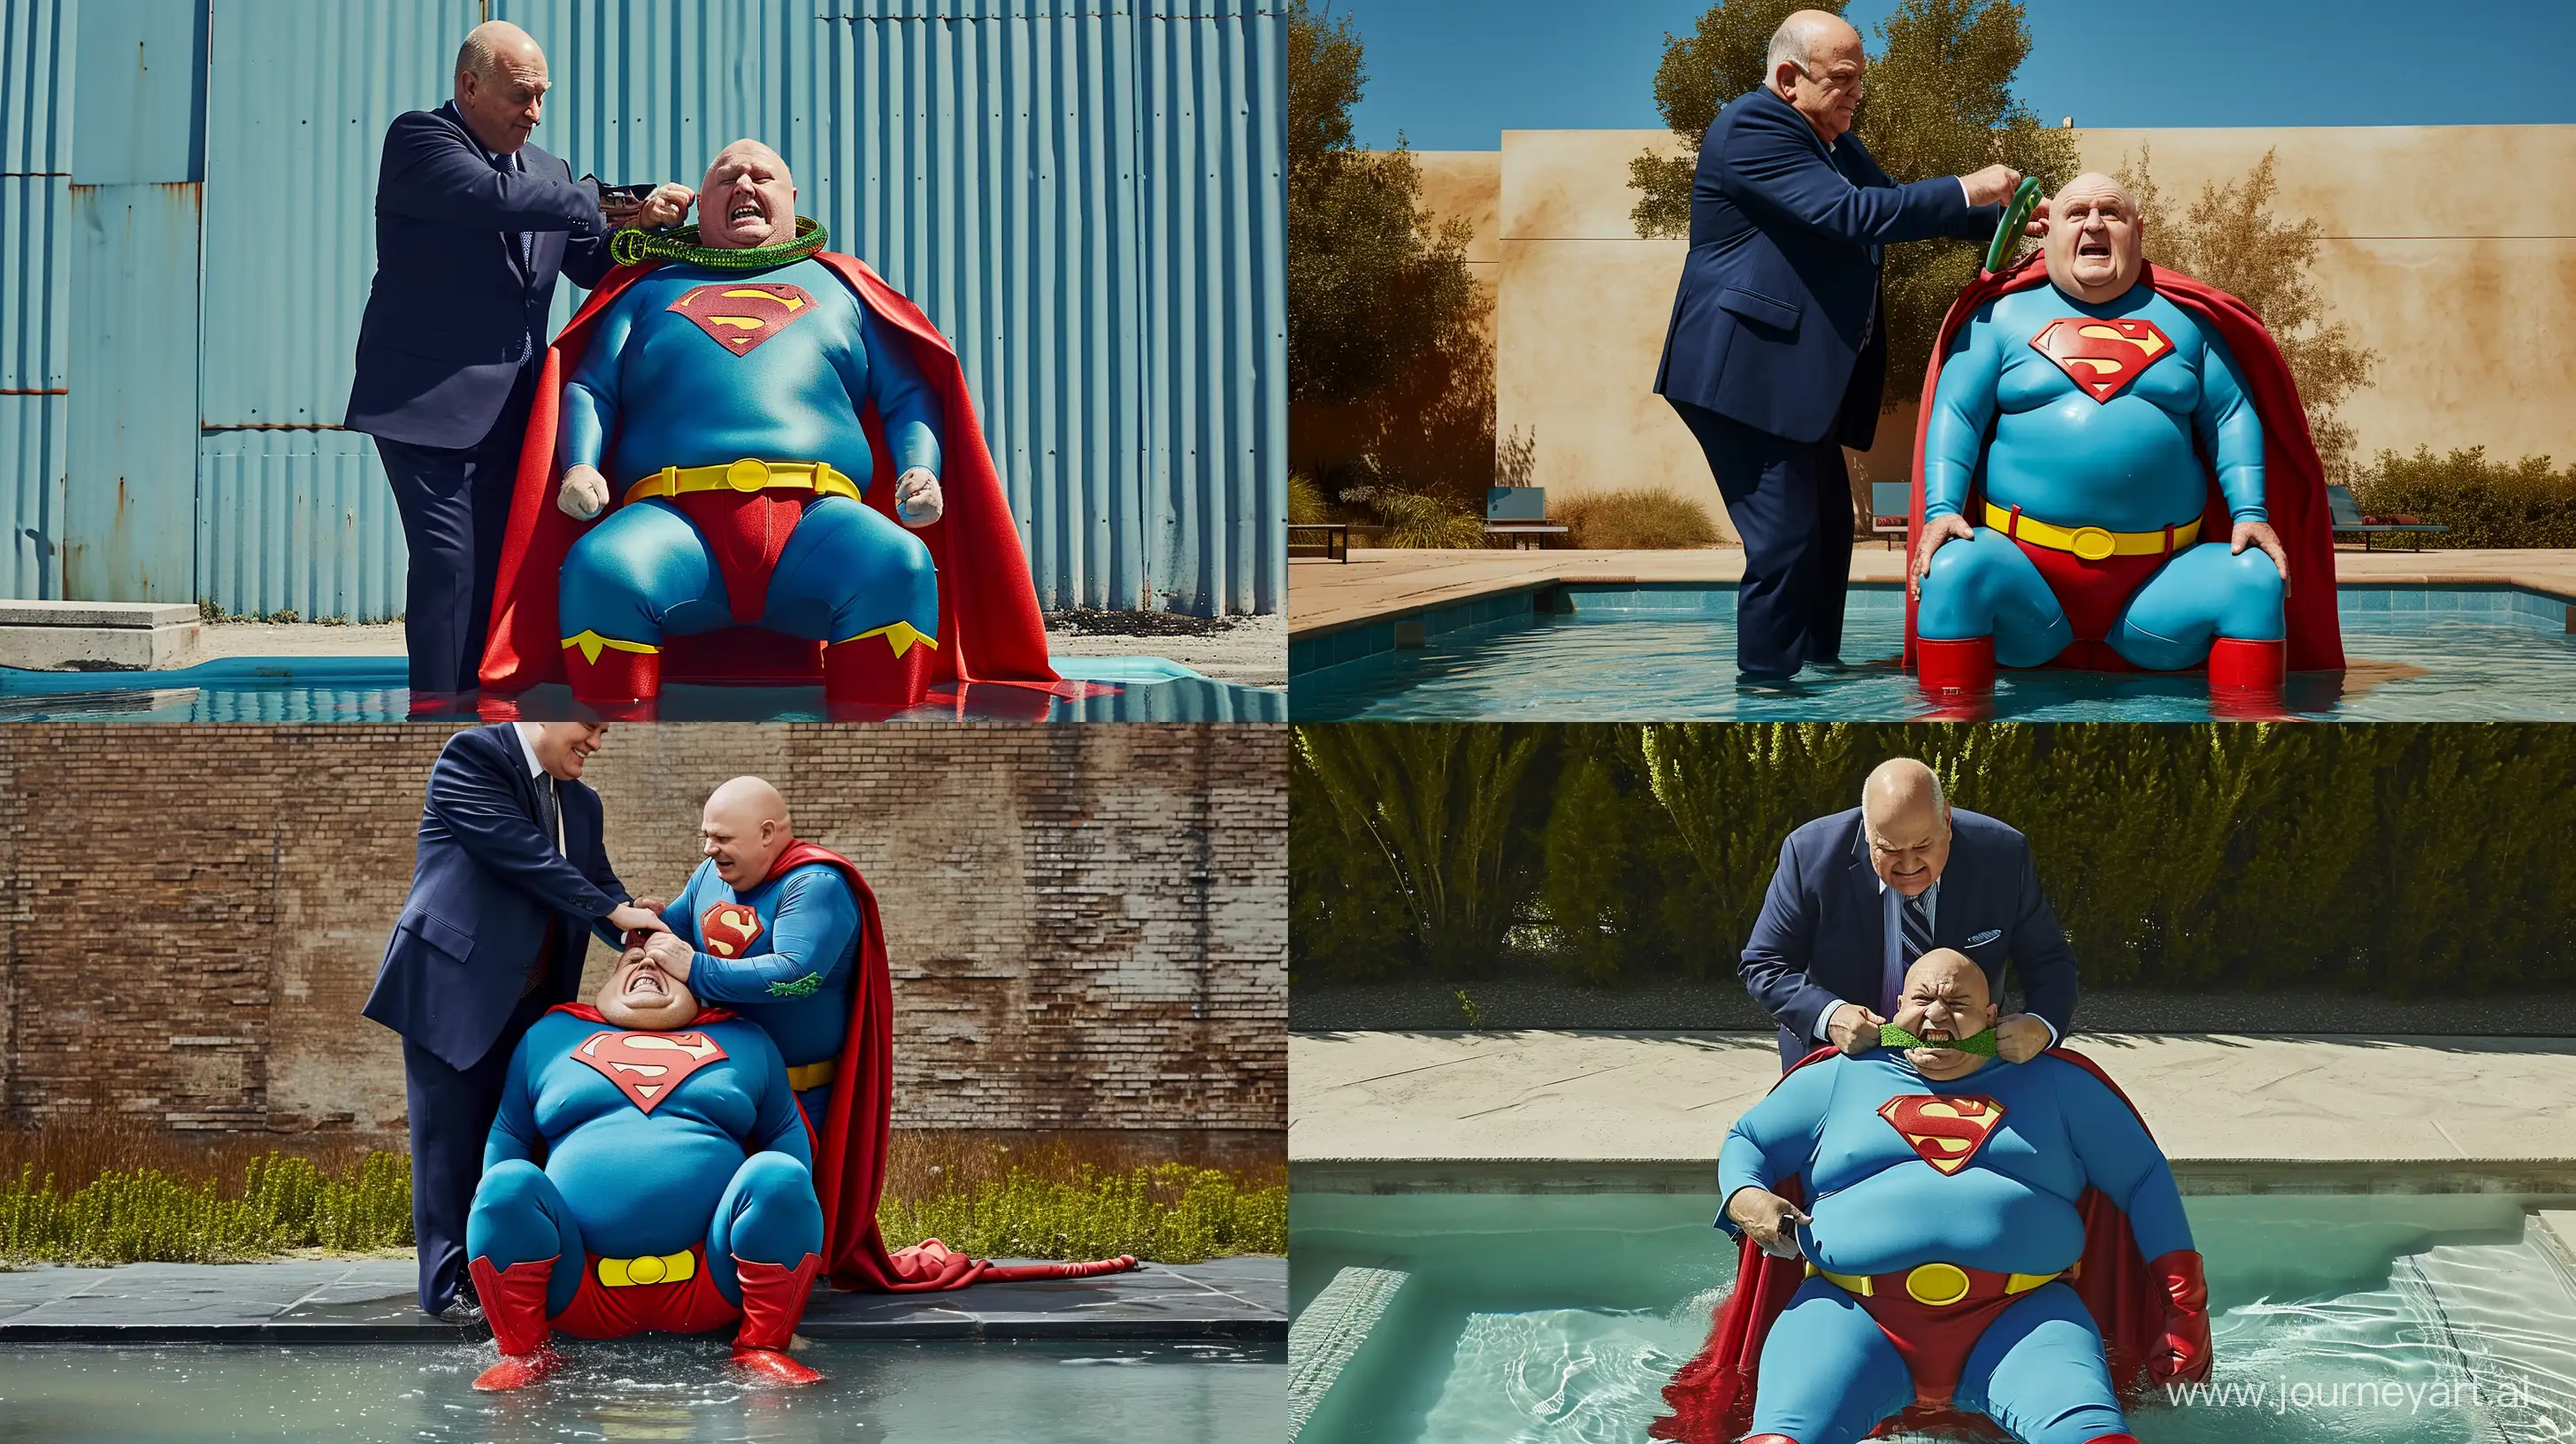 Eccentric-Superhero-Supervision-Happy-Man-Tightening-Shiny-Green-Collar-on-Angry-Superman-in-Pool